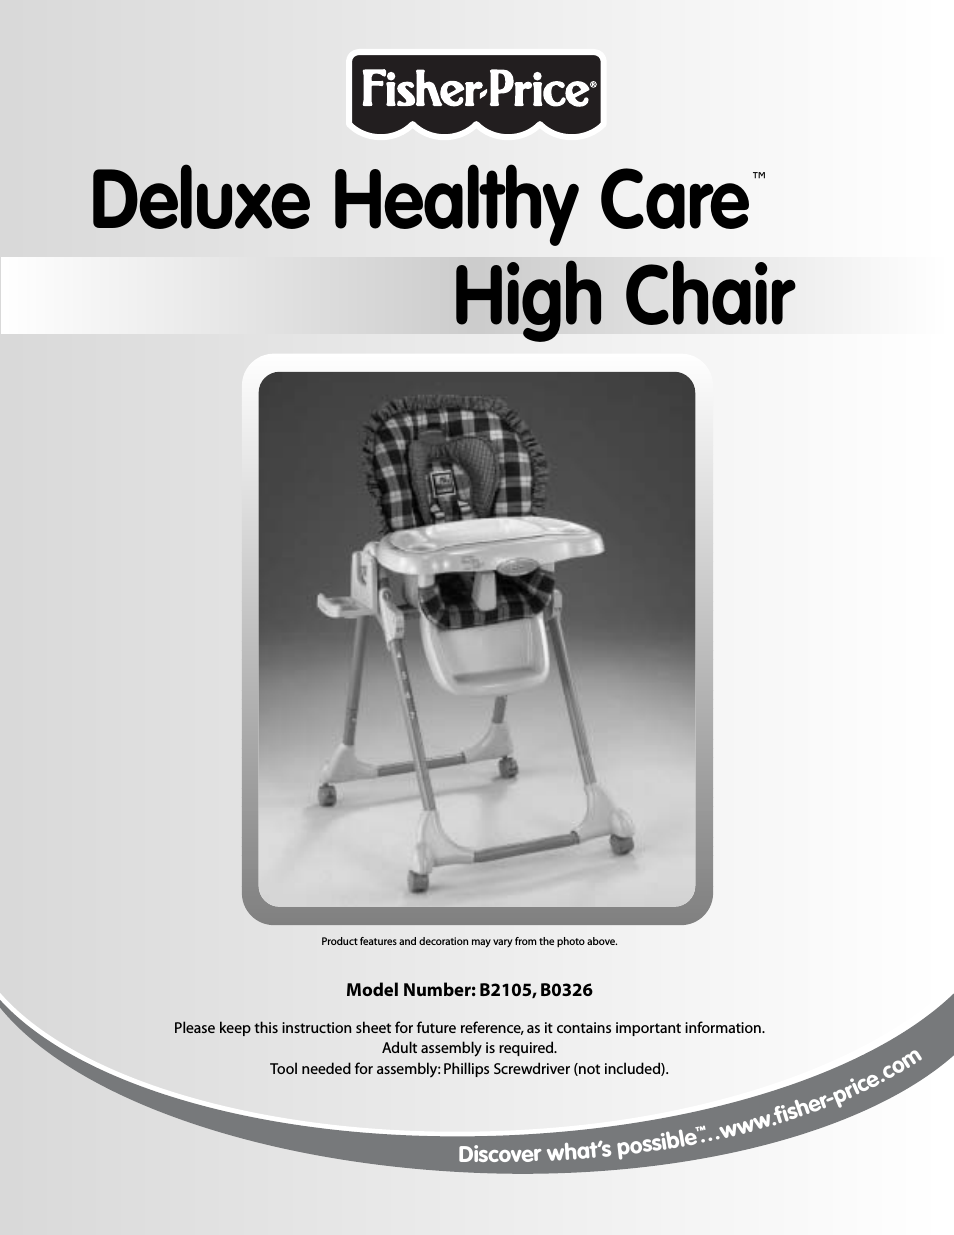 DELUXE HEALTHY CARE B0326